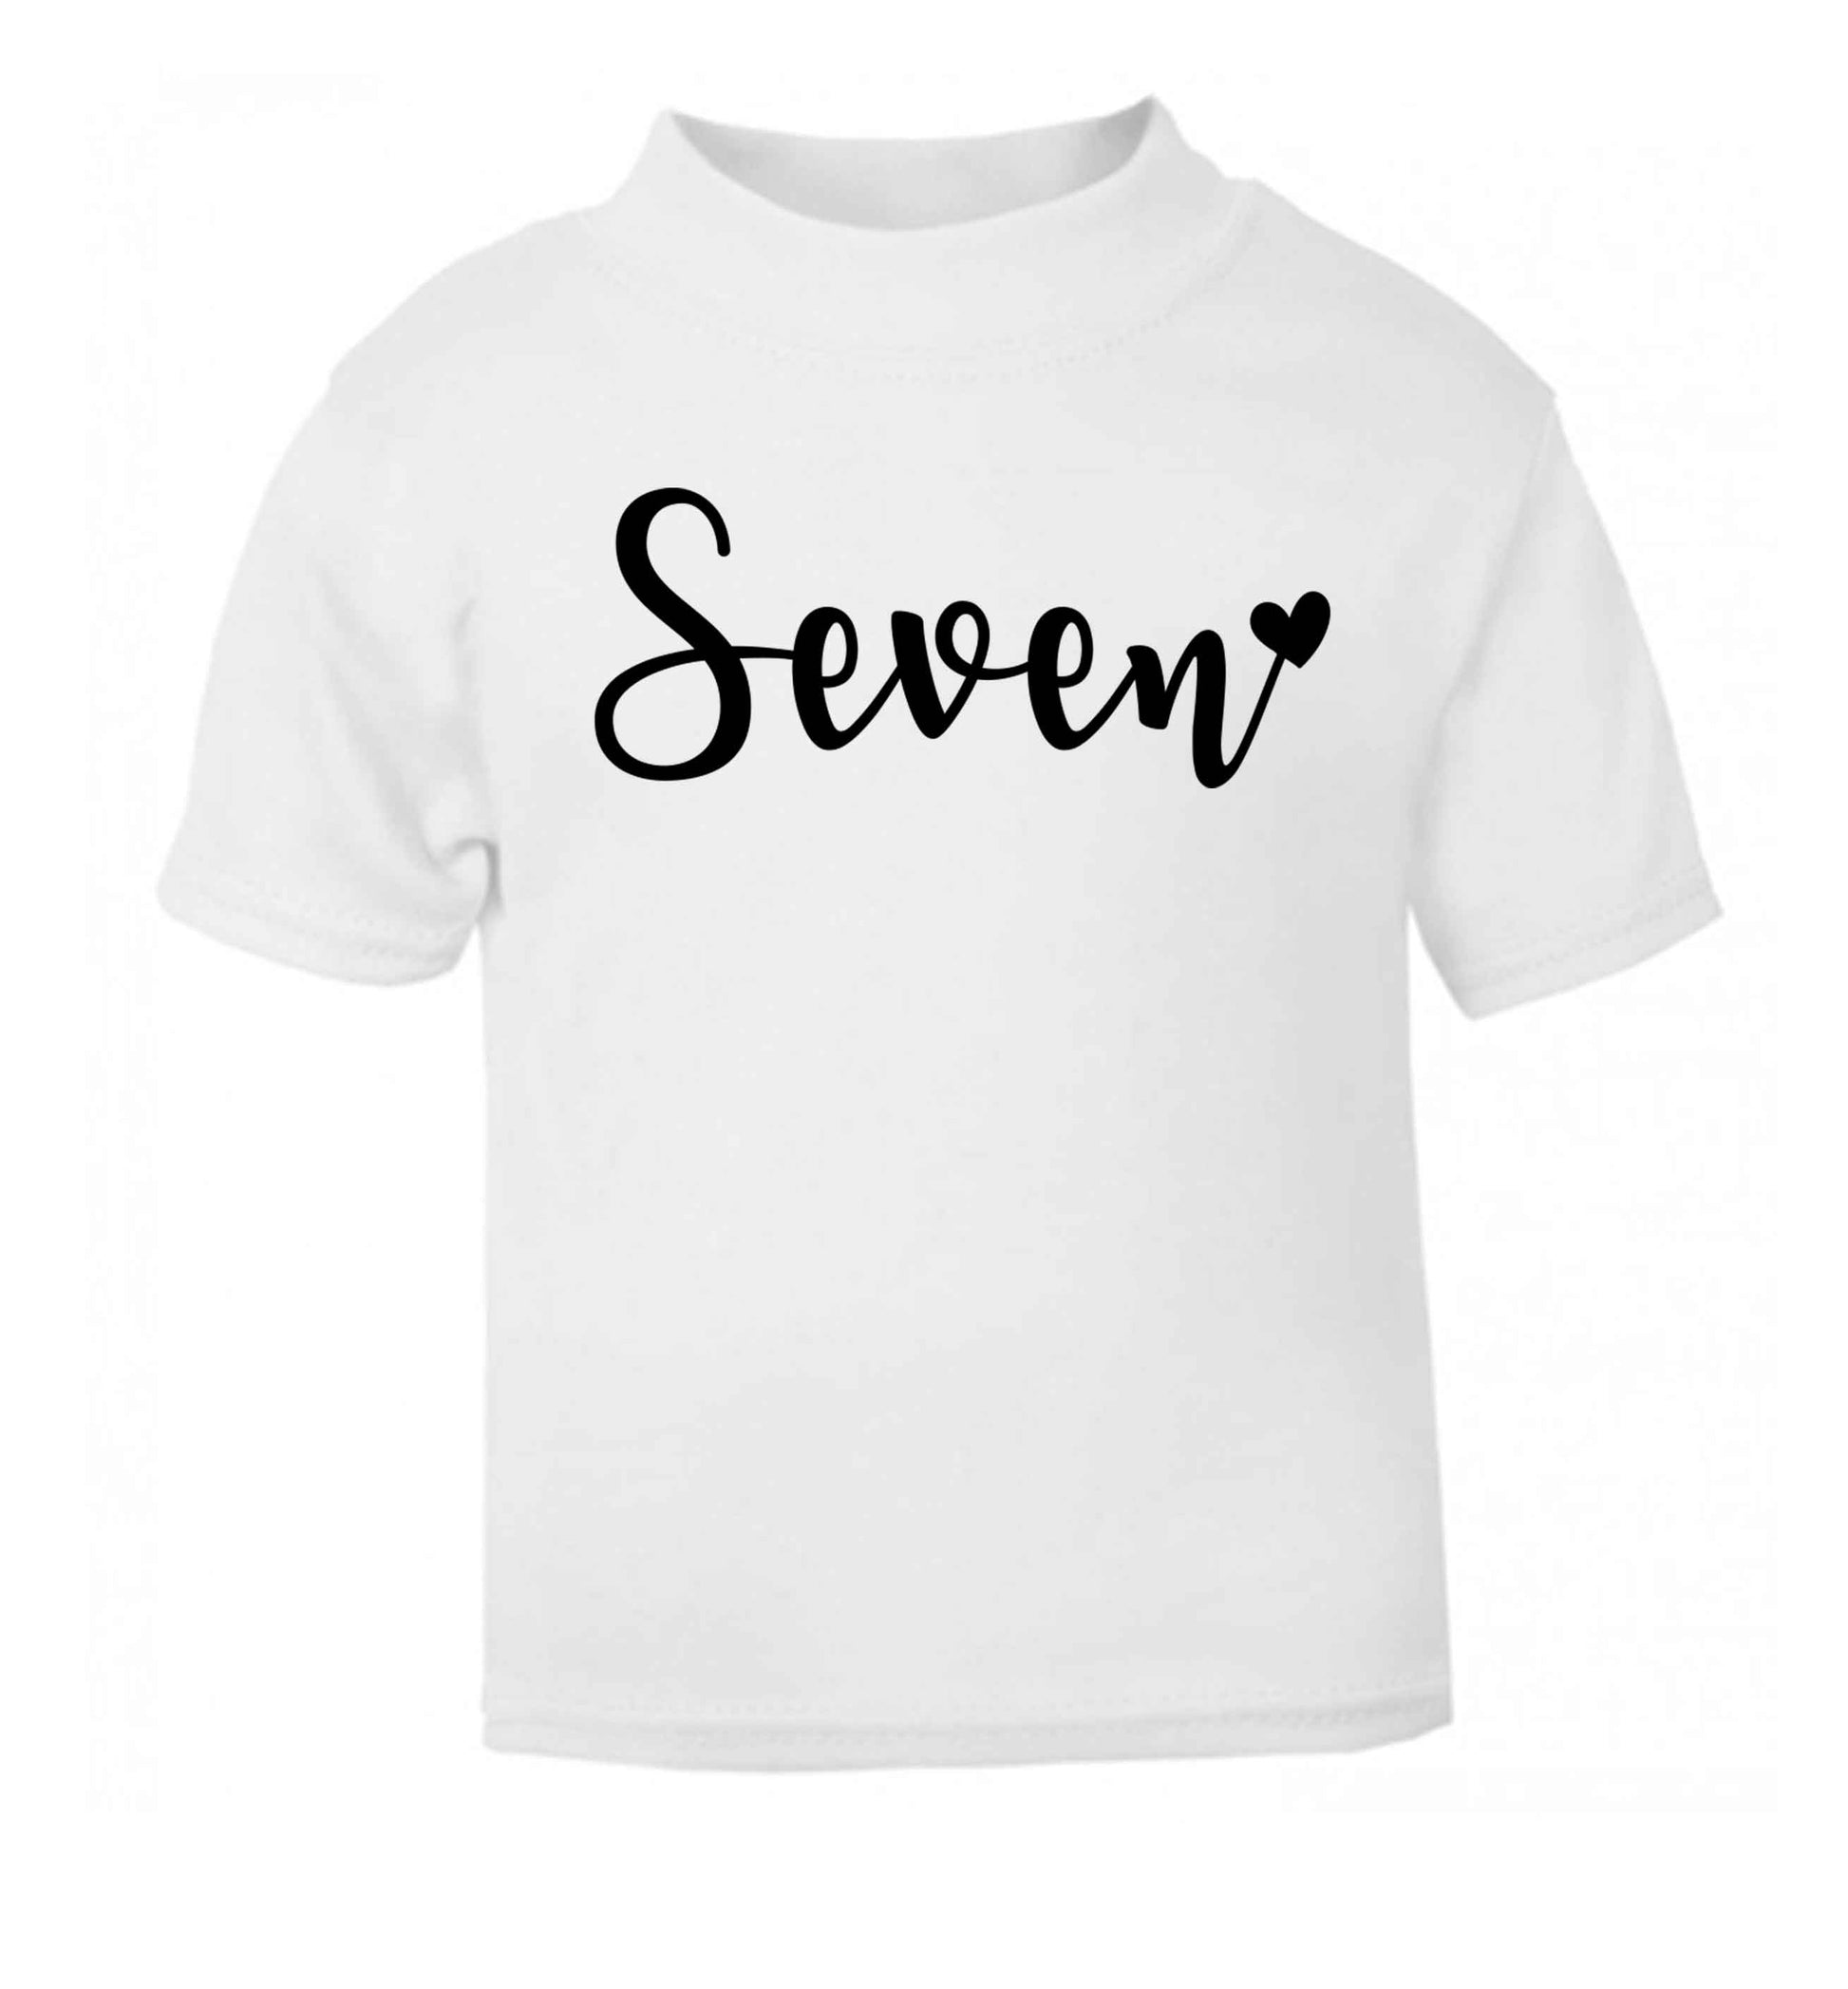 Seven and heart white baby toddler Tshirt 2 Years